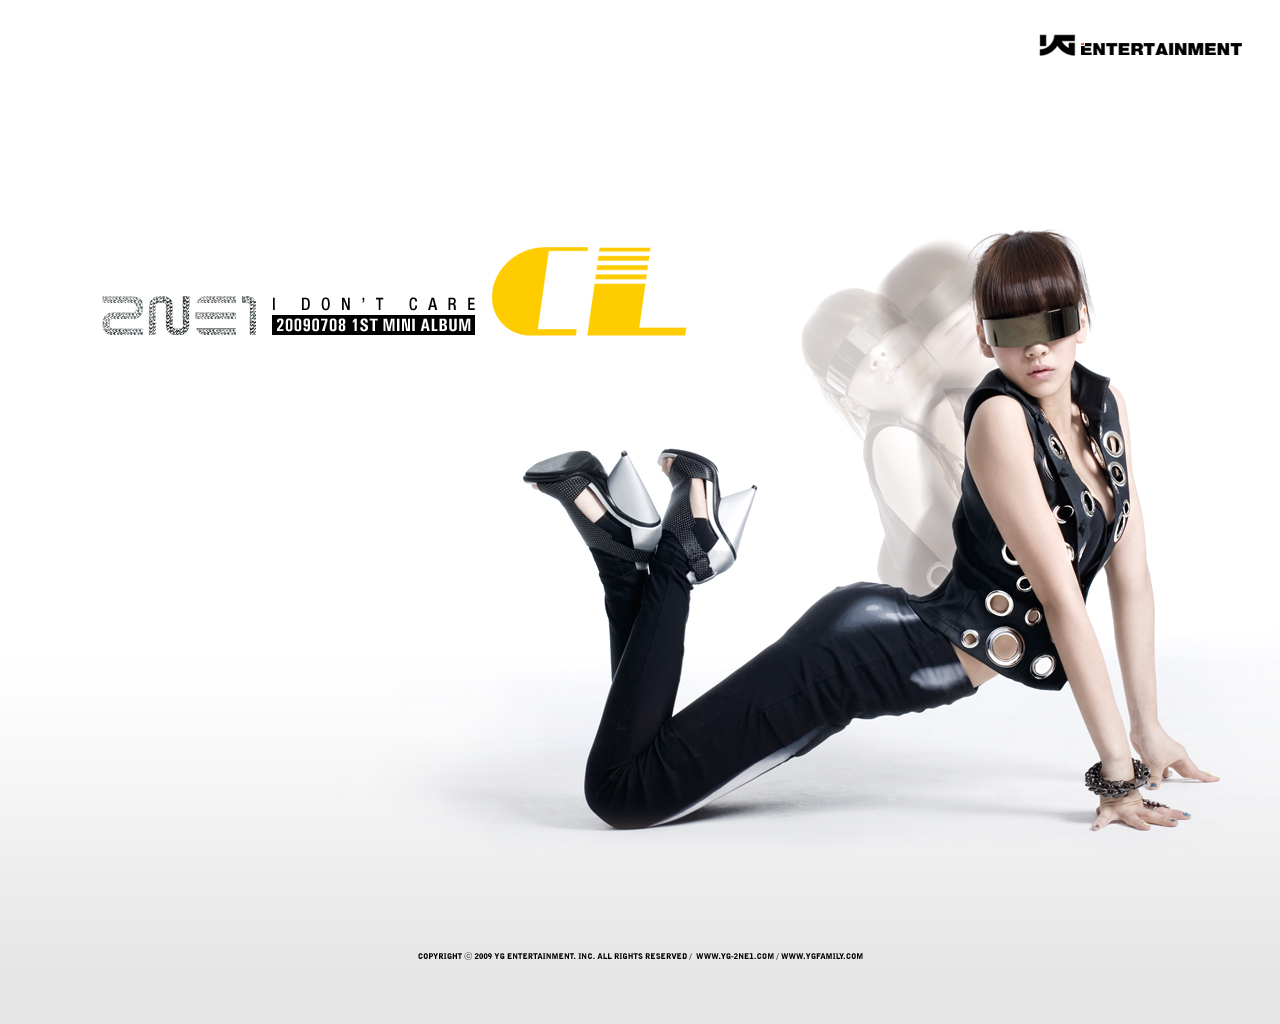 CL-I Dont Care - Lee Chae-rin Wallpaper (29439978) - Fanpop